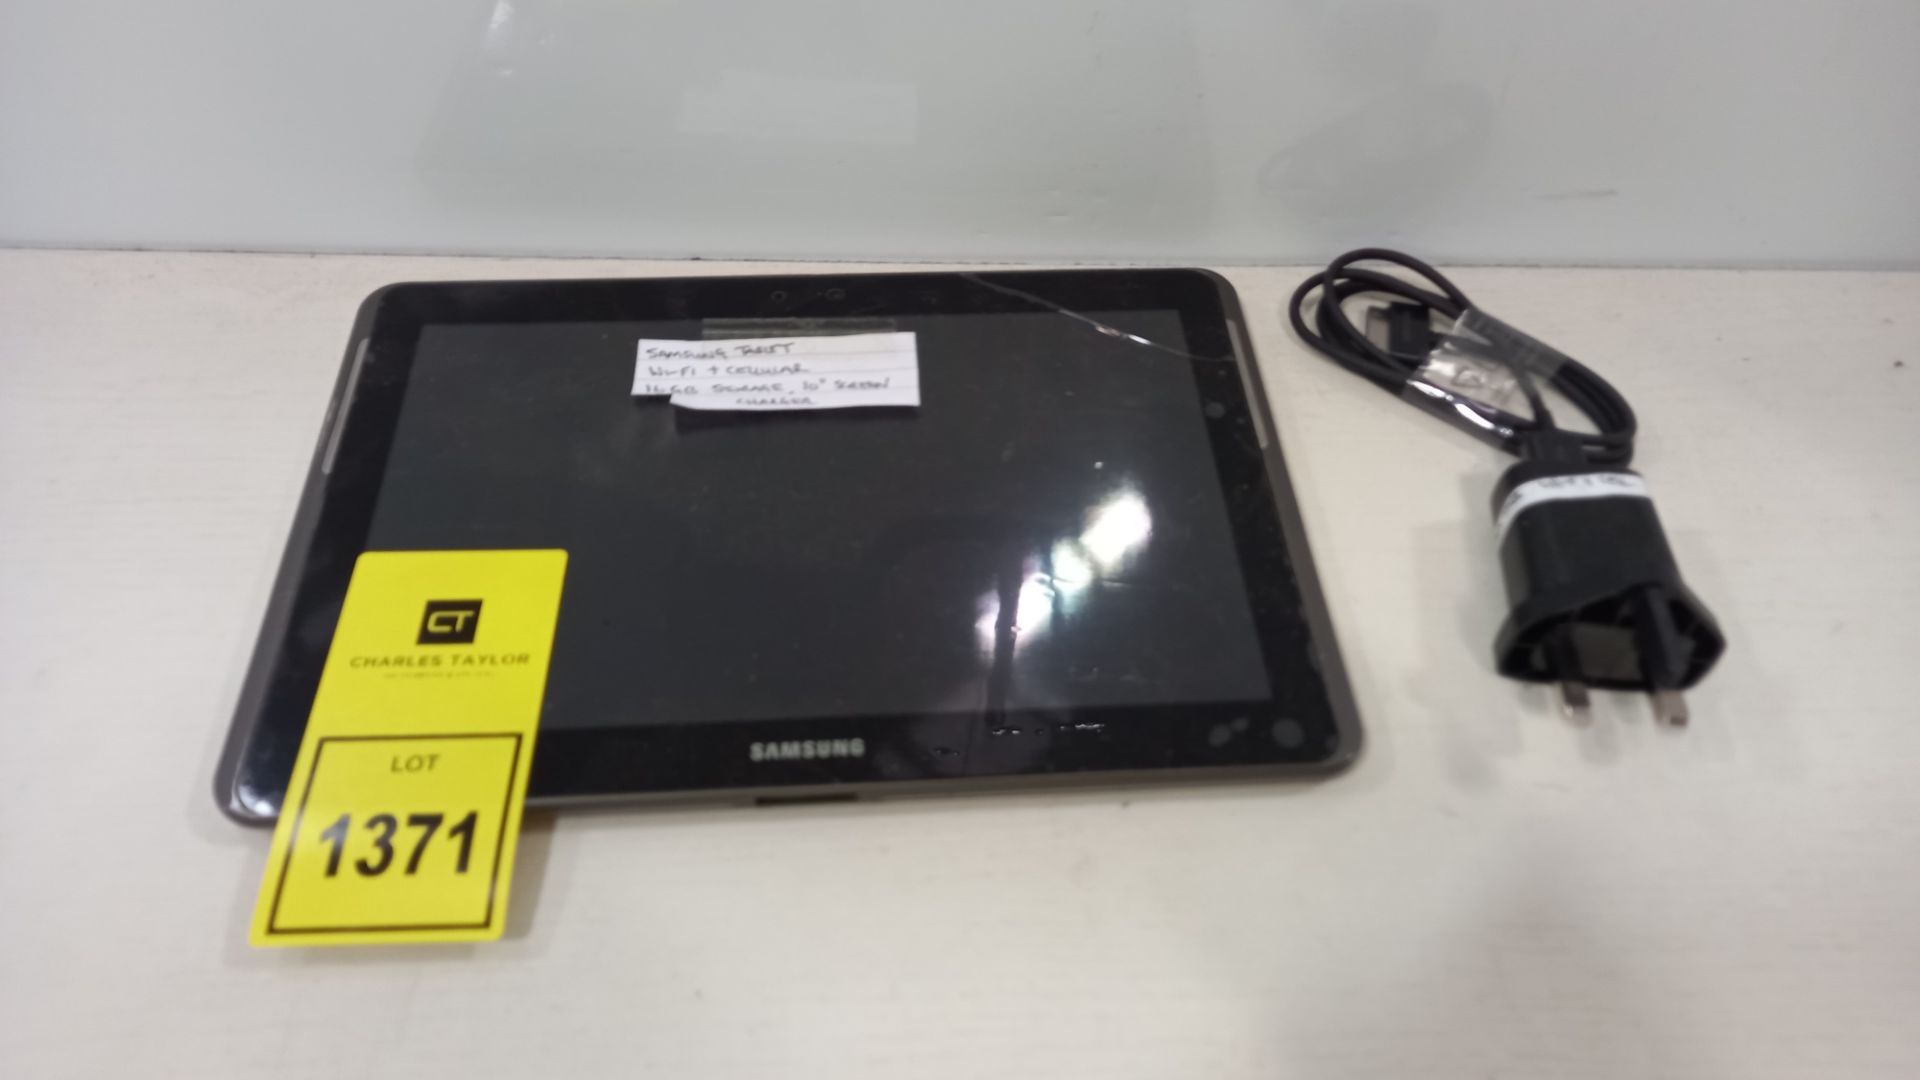 SAMSUNG TABLET WITH WIFI AND CELLLAR , 16GB STORAGE , 10 SCREEN ALSO COMES WITH CHARGER